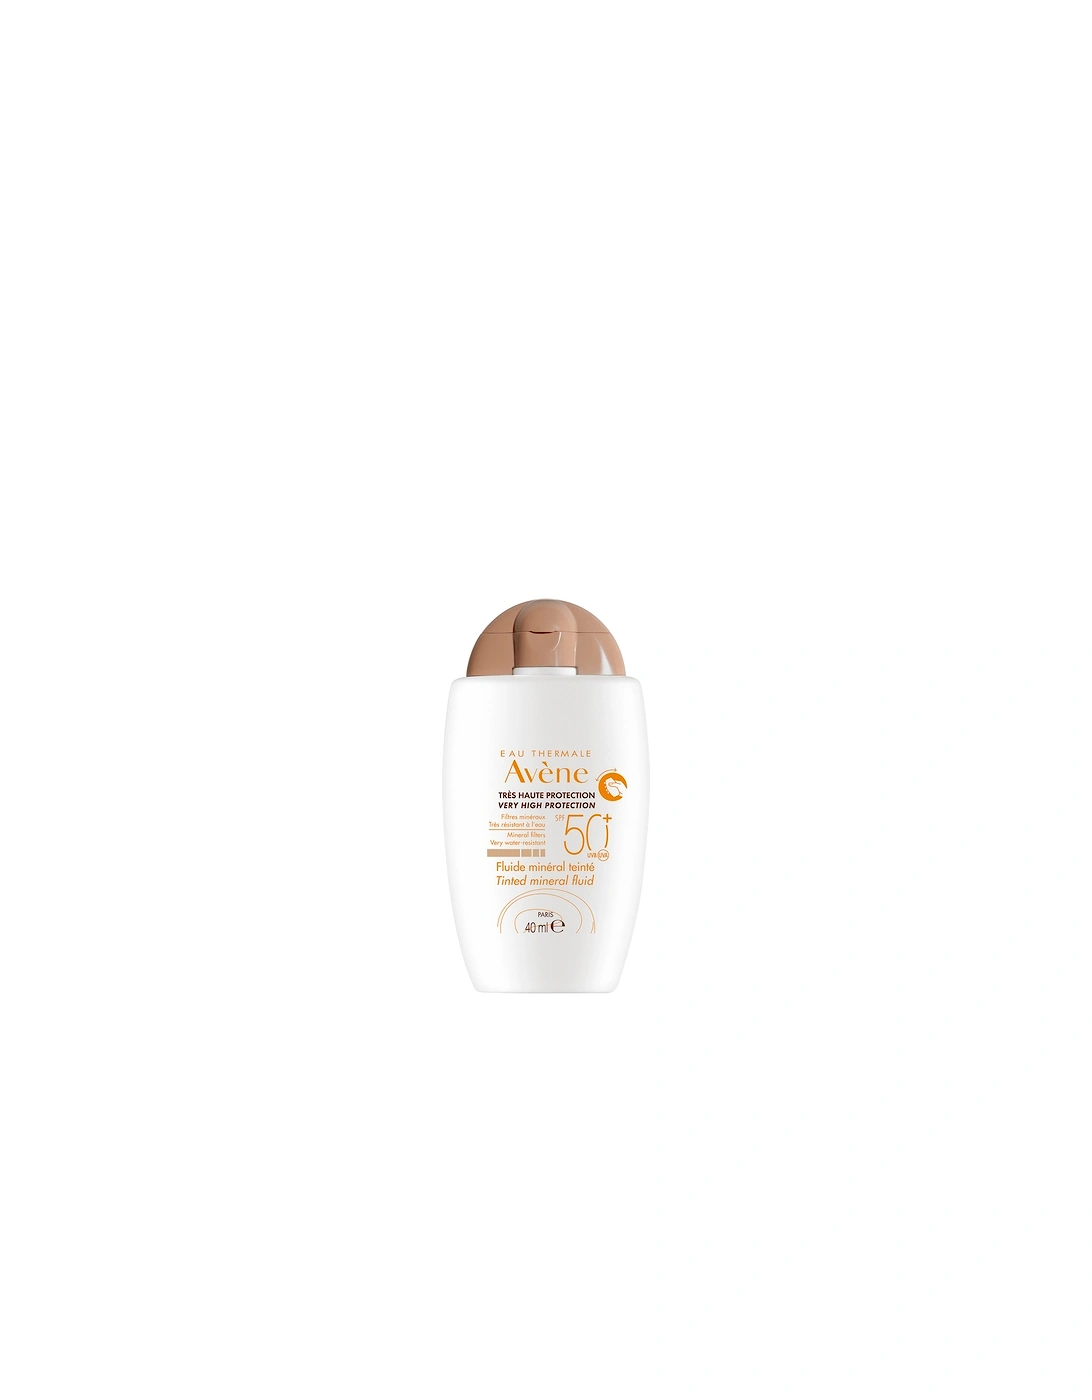 Avène Very High Protection Tinted Mineral Fluid SPF50+ Sun Cream for Intolerant Skin 40ml, 2 of 1